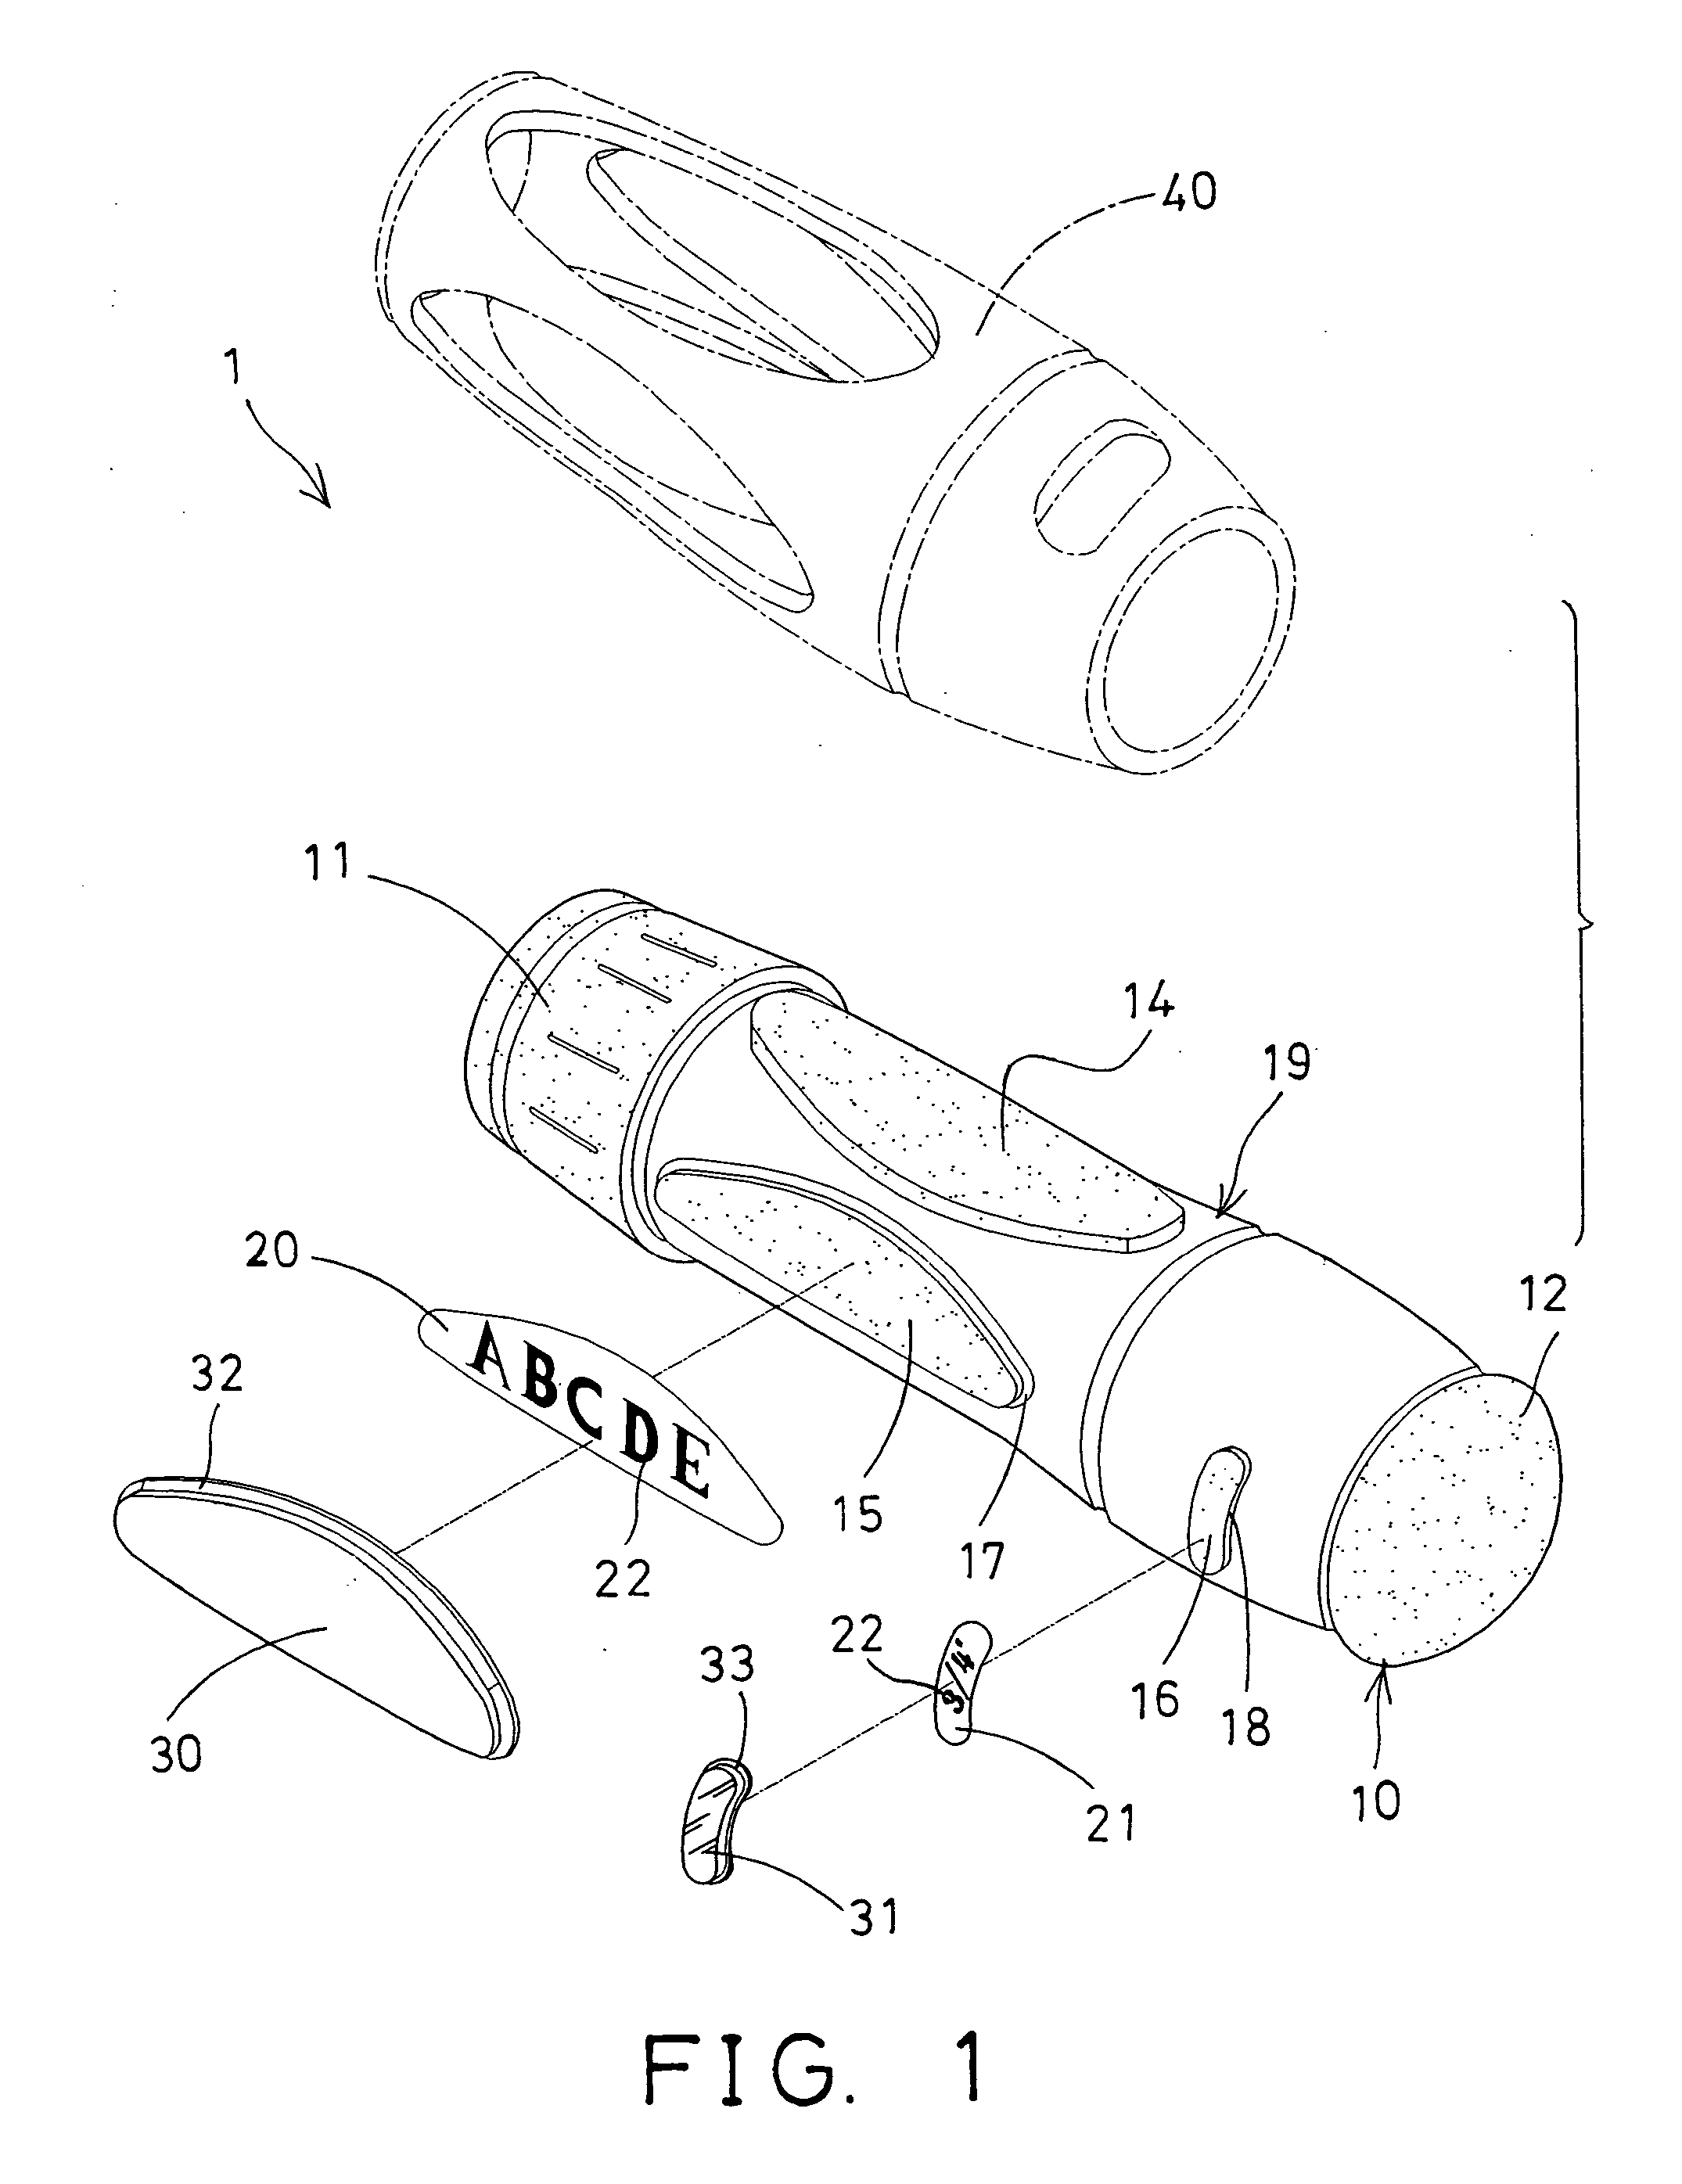 Method for manufacturing tool handle